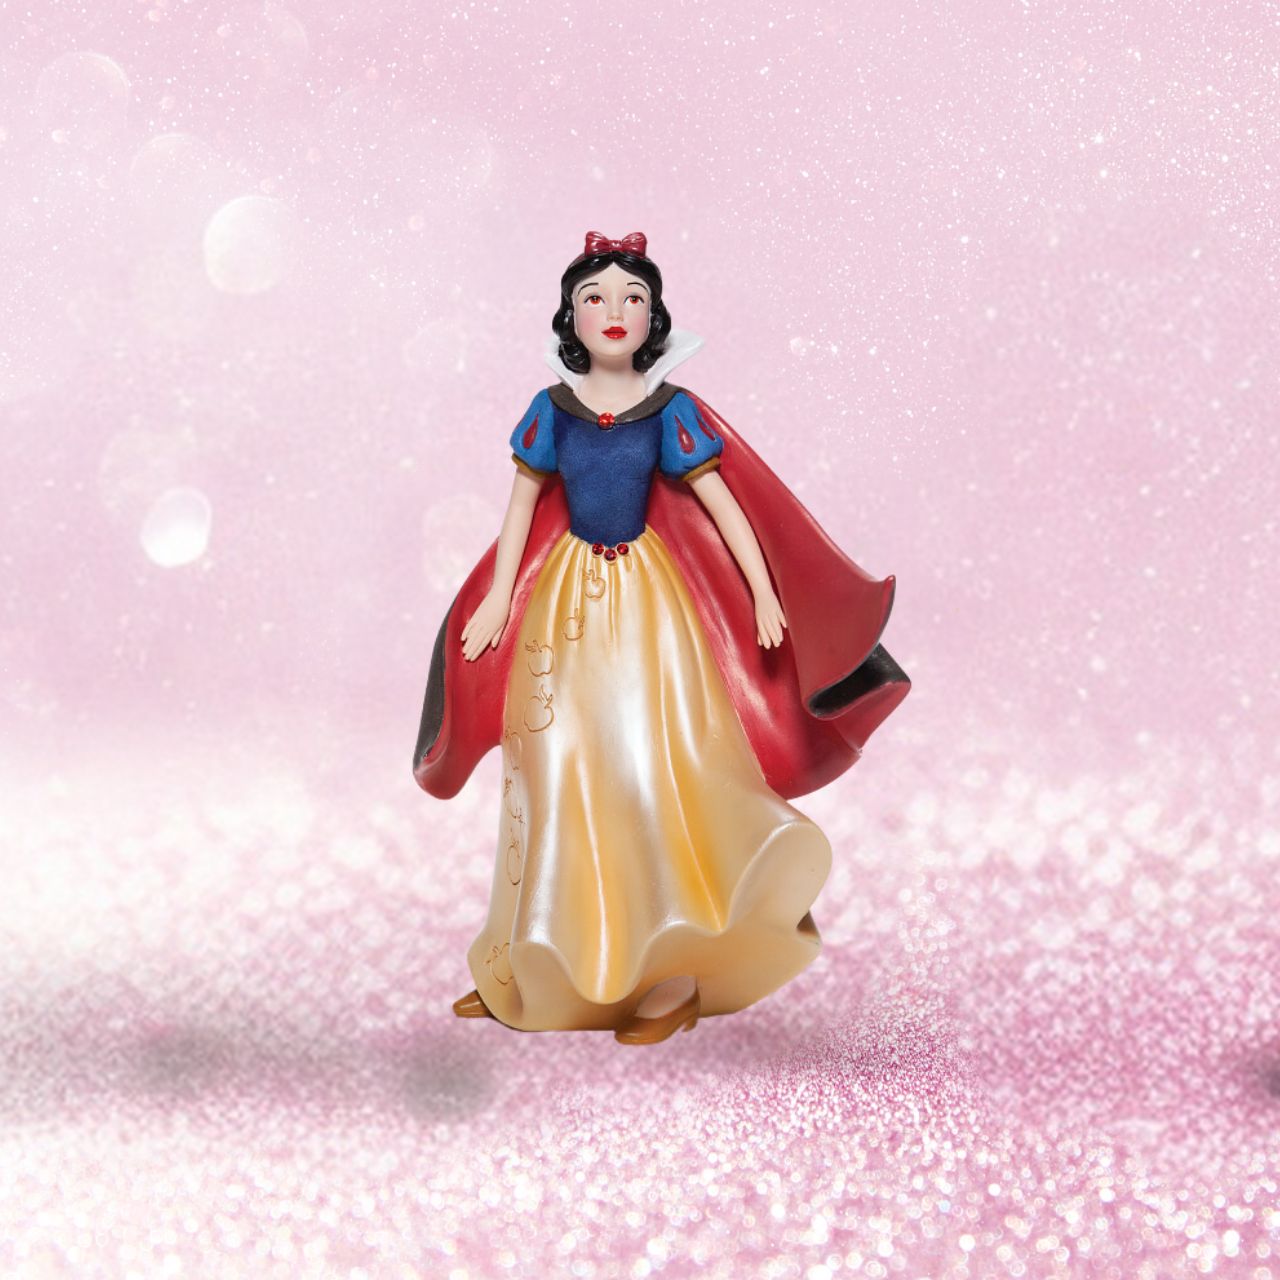 Snow White Couture de Force Figurine  Snow White with her skin fair as snow and lips red as apples follows the wind on a new adventure fit for a princess. Hand-crafted and hand-painted, her iconic outfit shimmers in yellow satins and dark wool felts plussed with red faux gem stones.